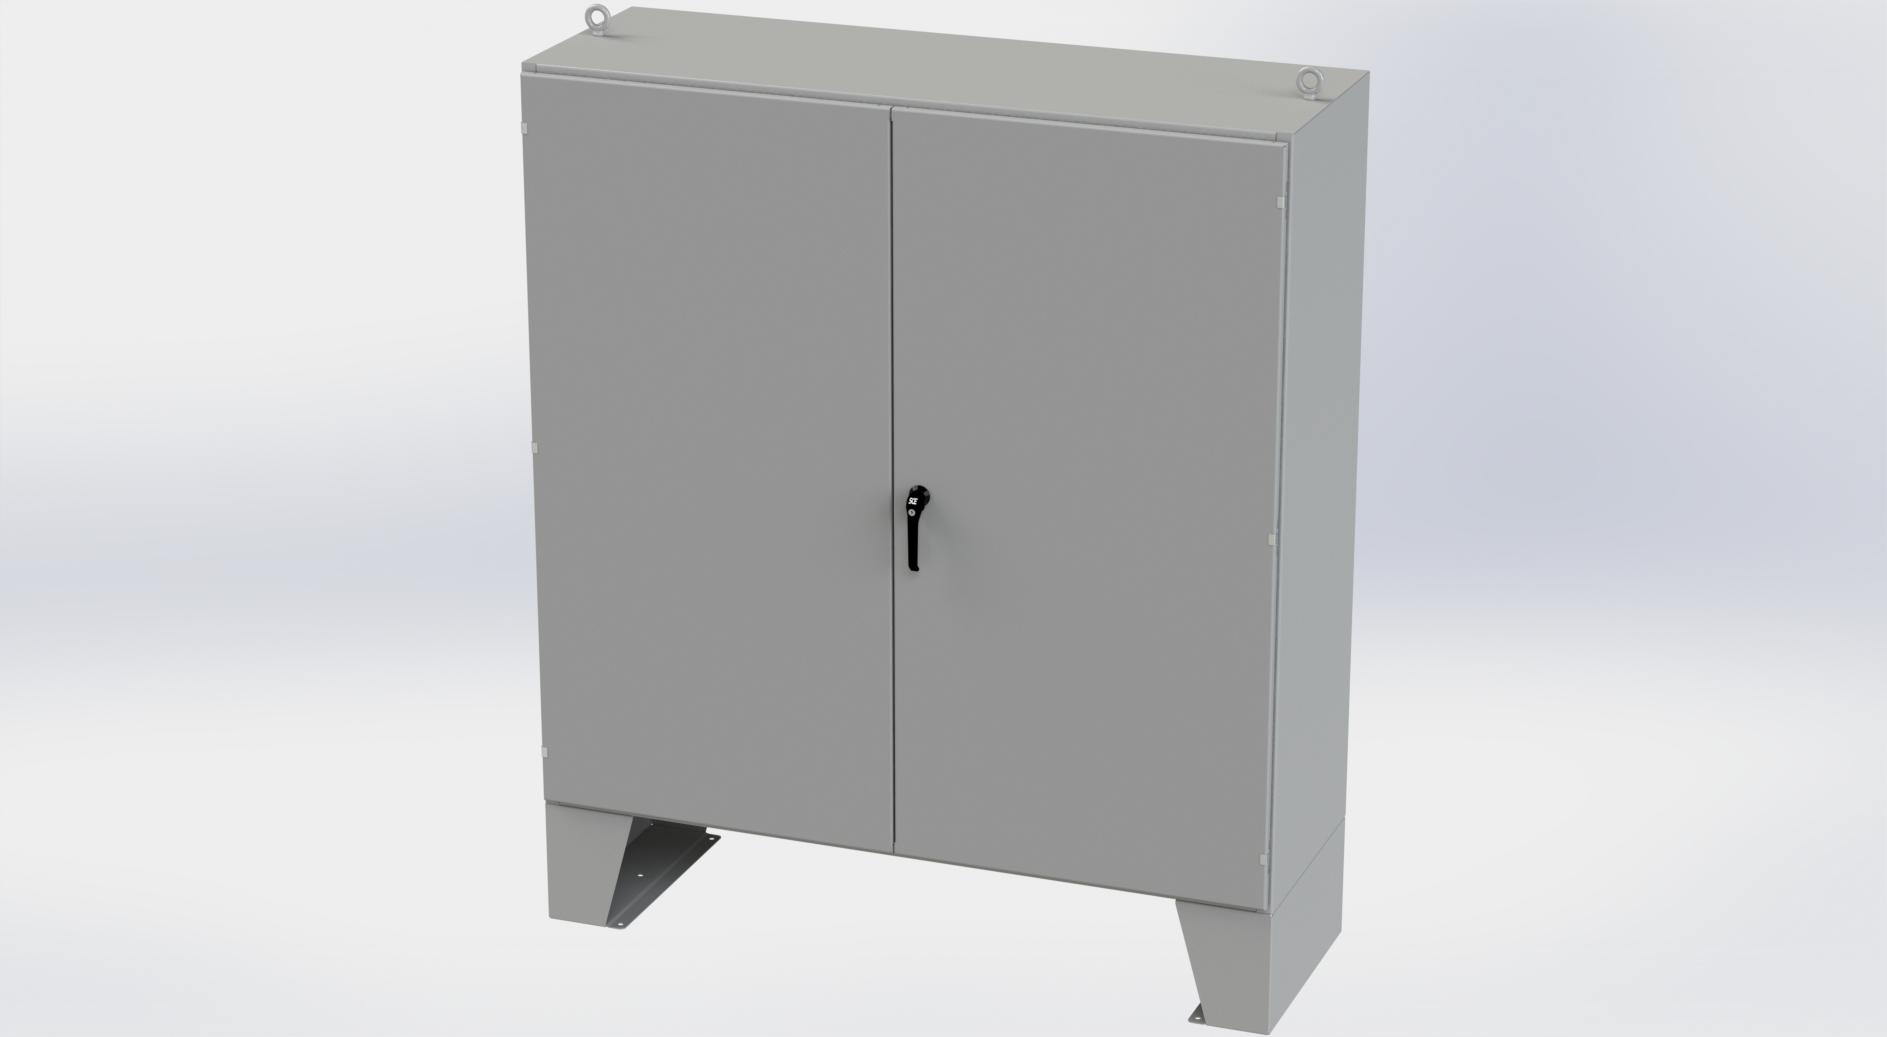 Saginaw Control SCE-727224ULP 2DR LP Enclosure, Height:72.00", Width:72.00", Depth:24.00", ANSI-61 gray powder coating inside and out. Optional sub-panels are powder coated white.